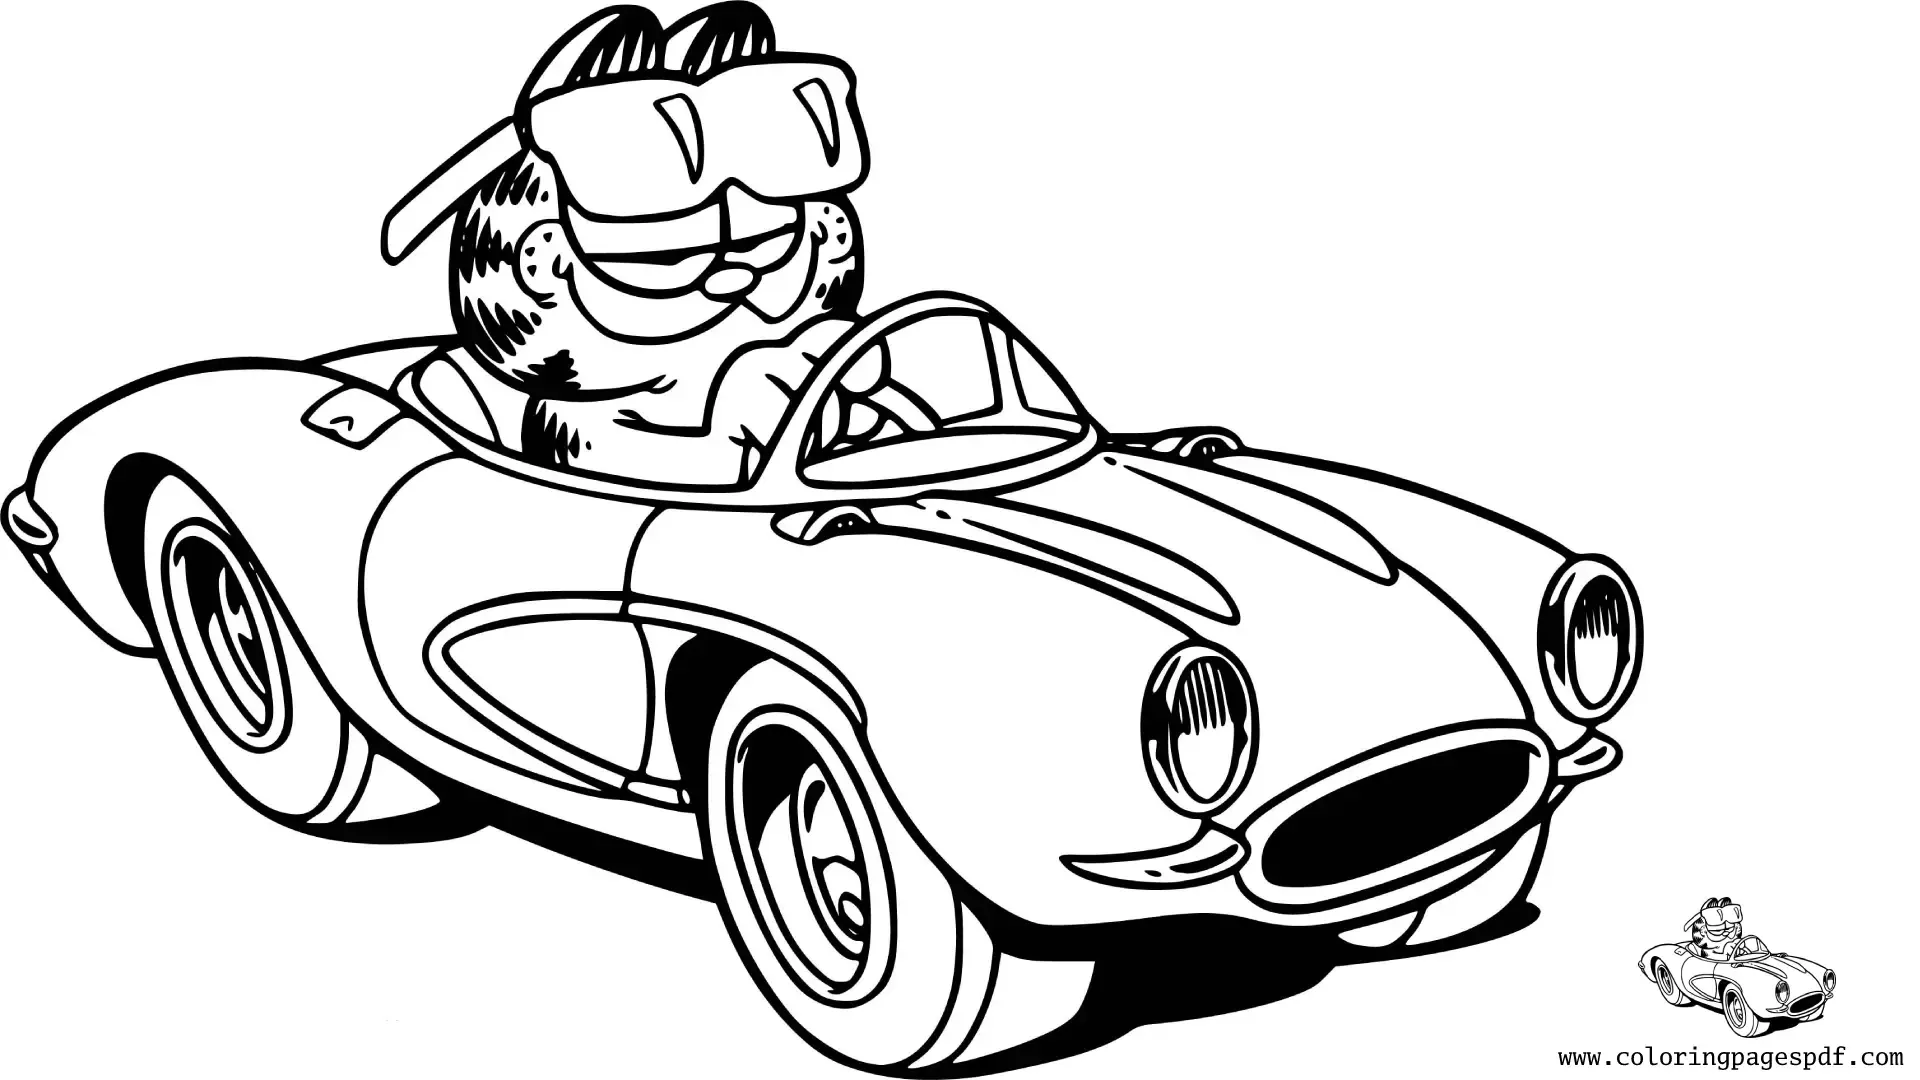 20 Amazing Car Coloring Pages